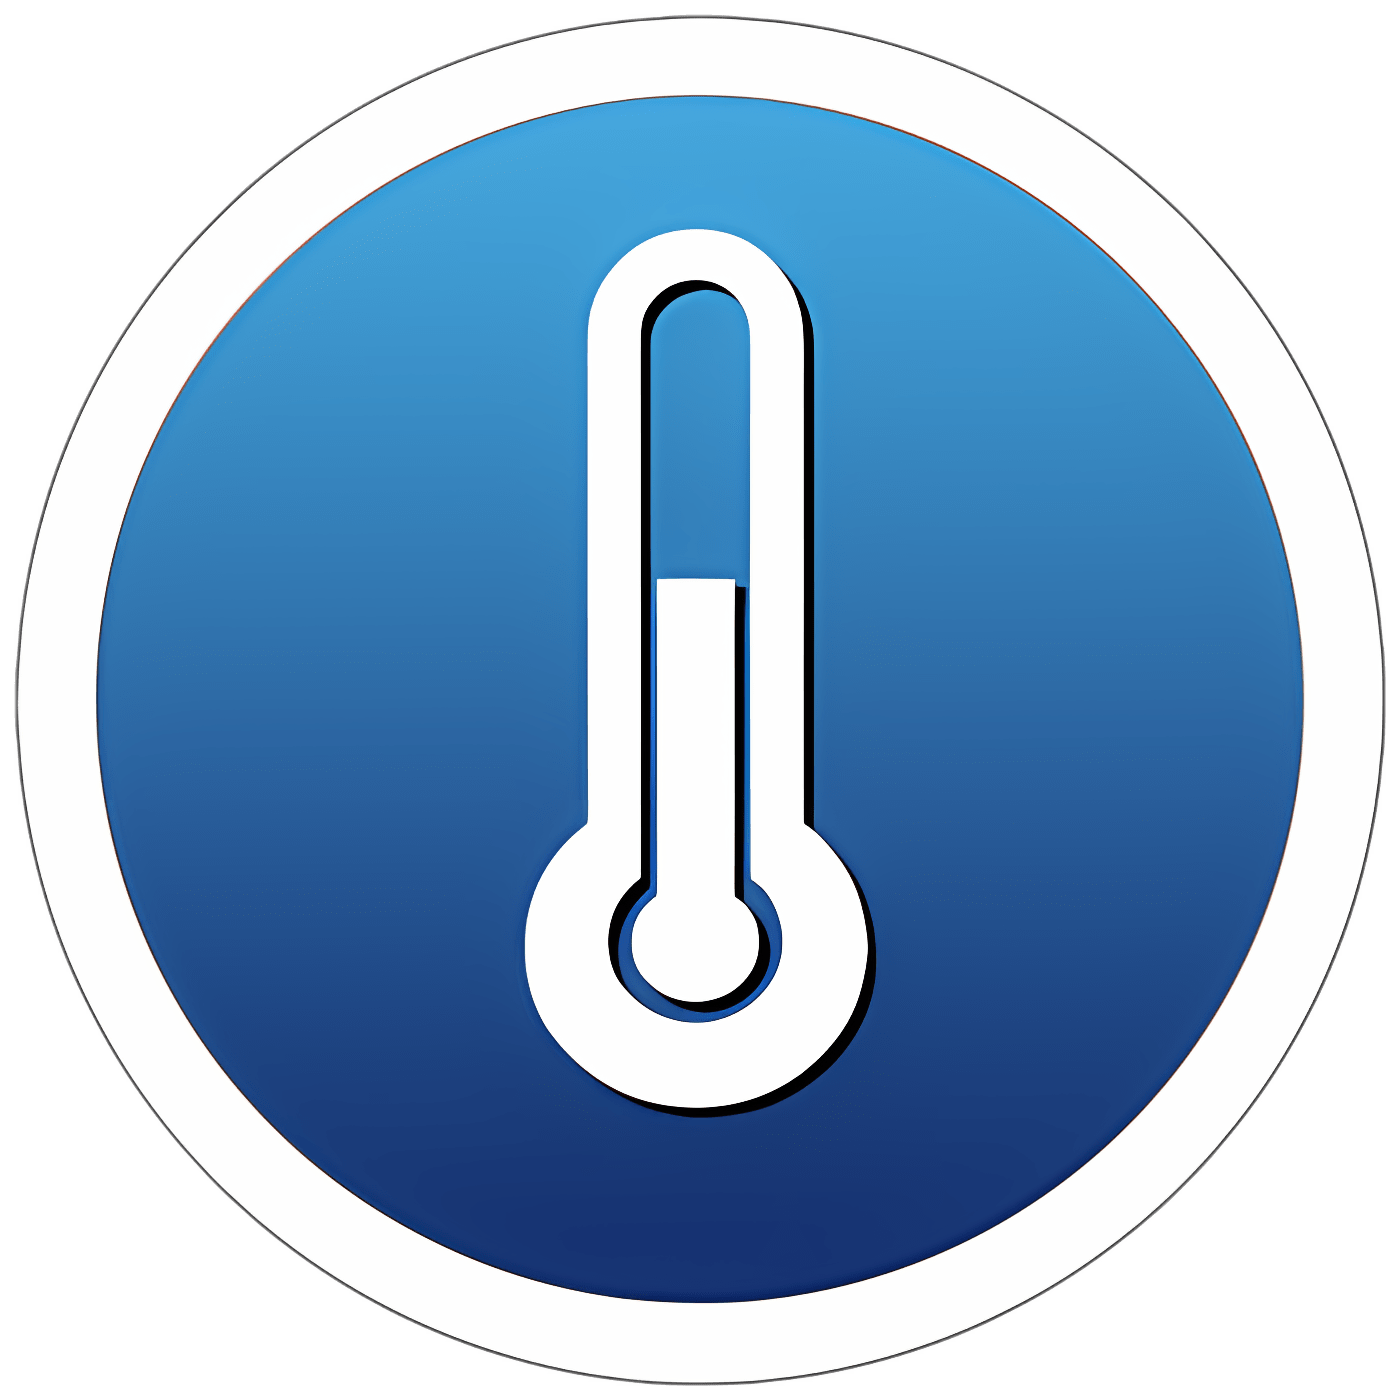 Download Temps - Weather, Time & Netatmo Install Latest App downloader